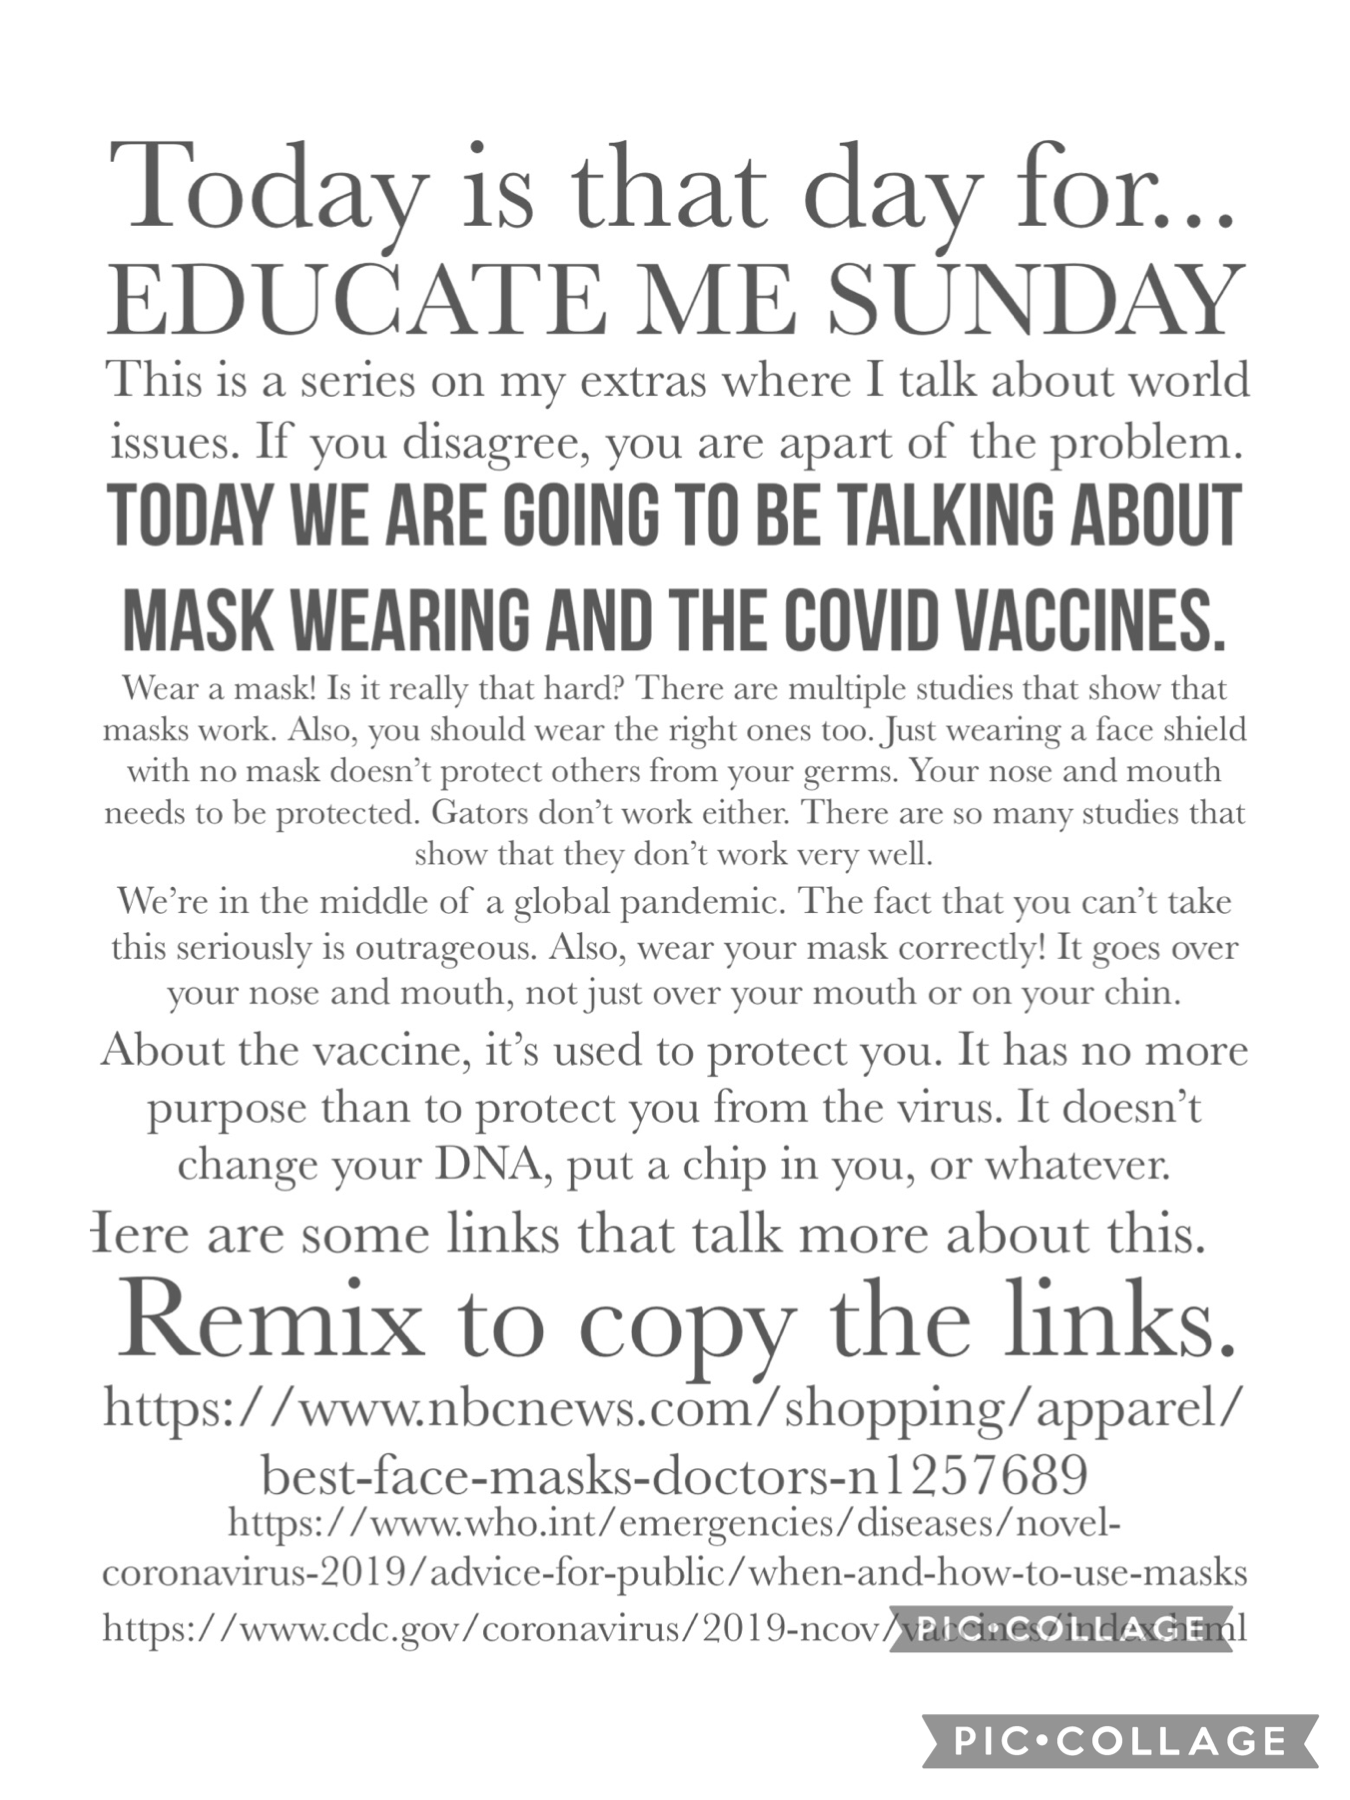 Educate me Sunday, February 14: Mask wearing and the Covid vaccine